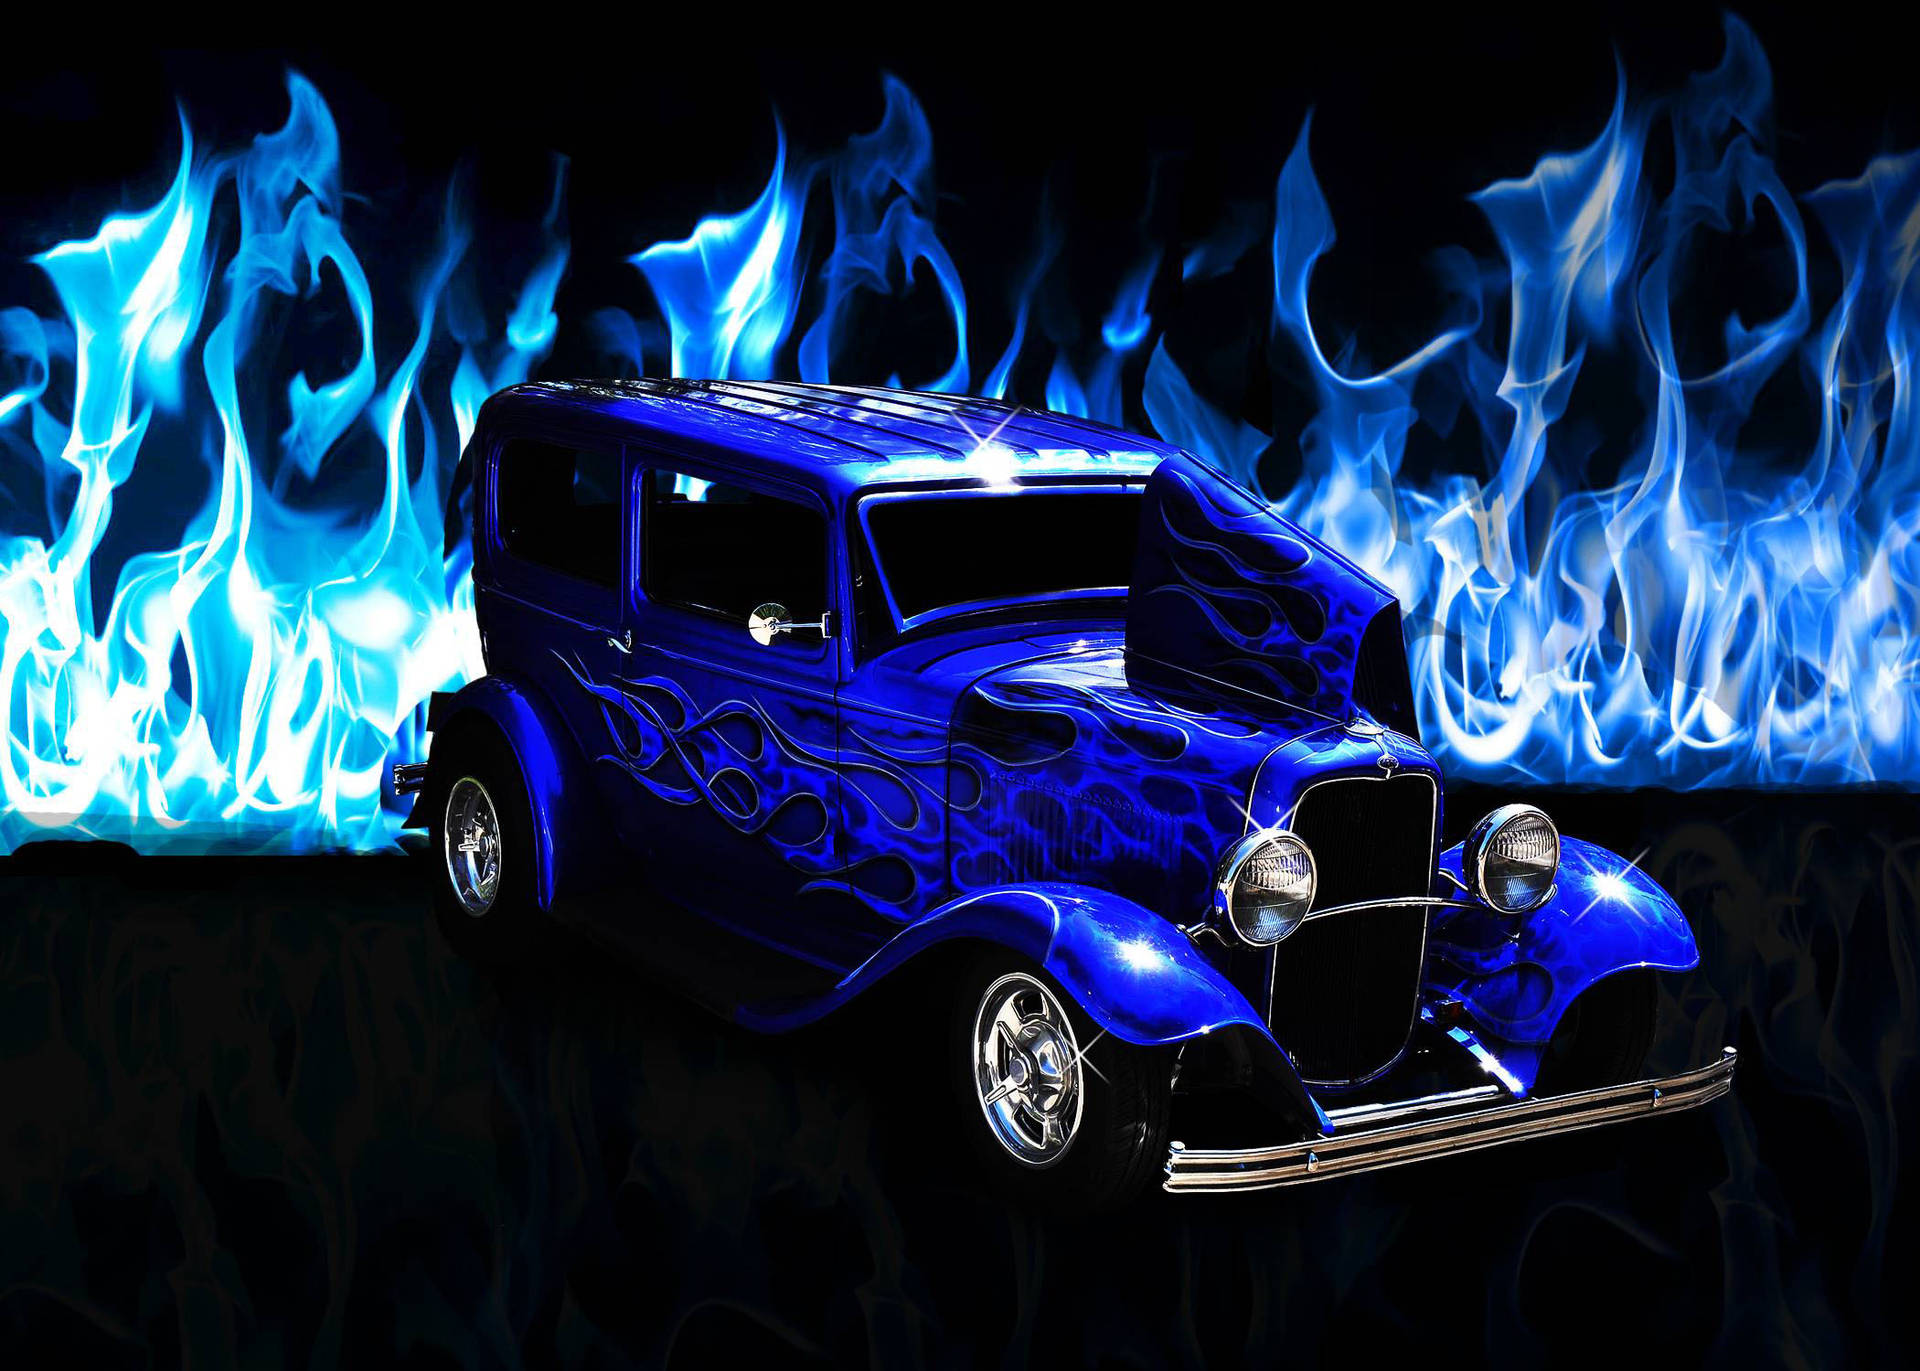 Vibrant Blue Flames Engulfing a Vintage Ford Wallpaper